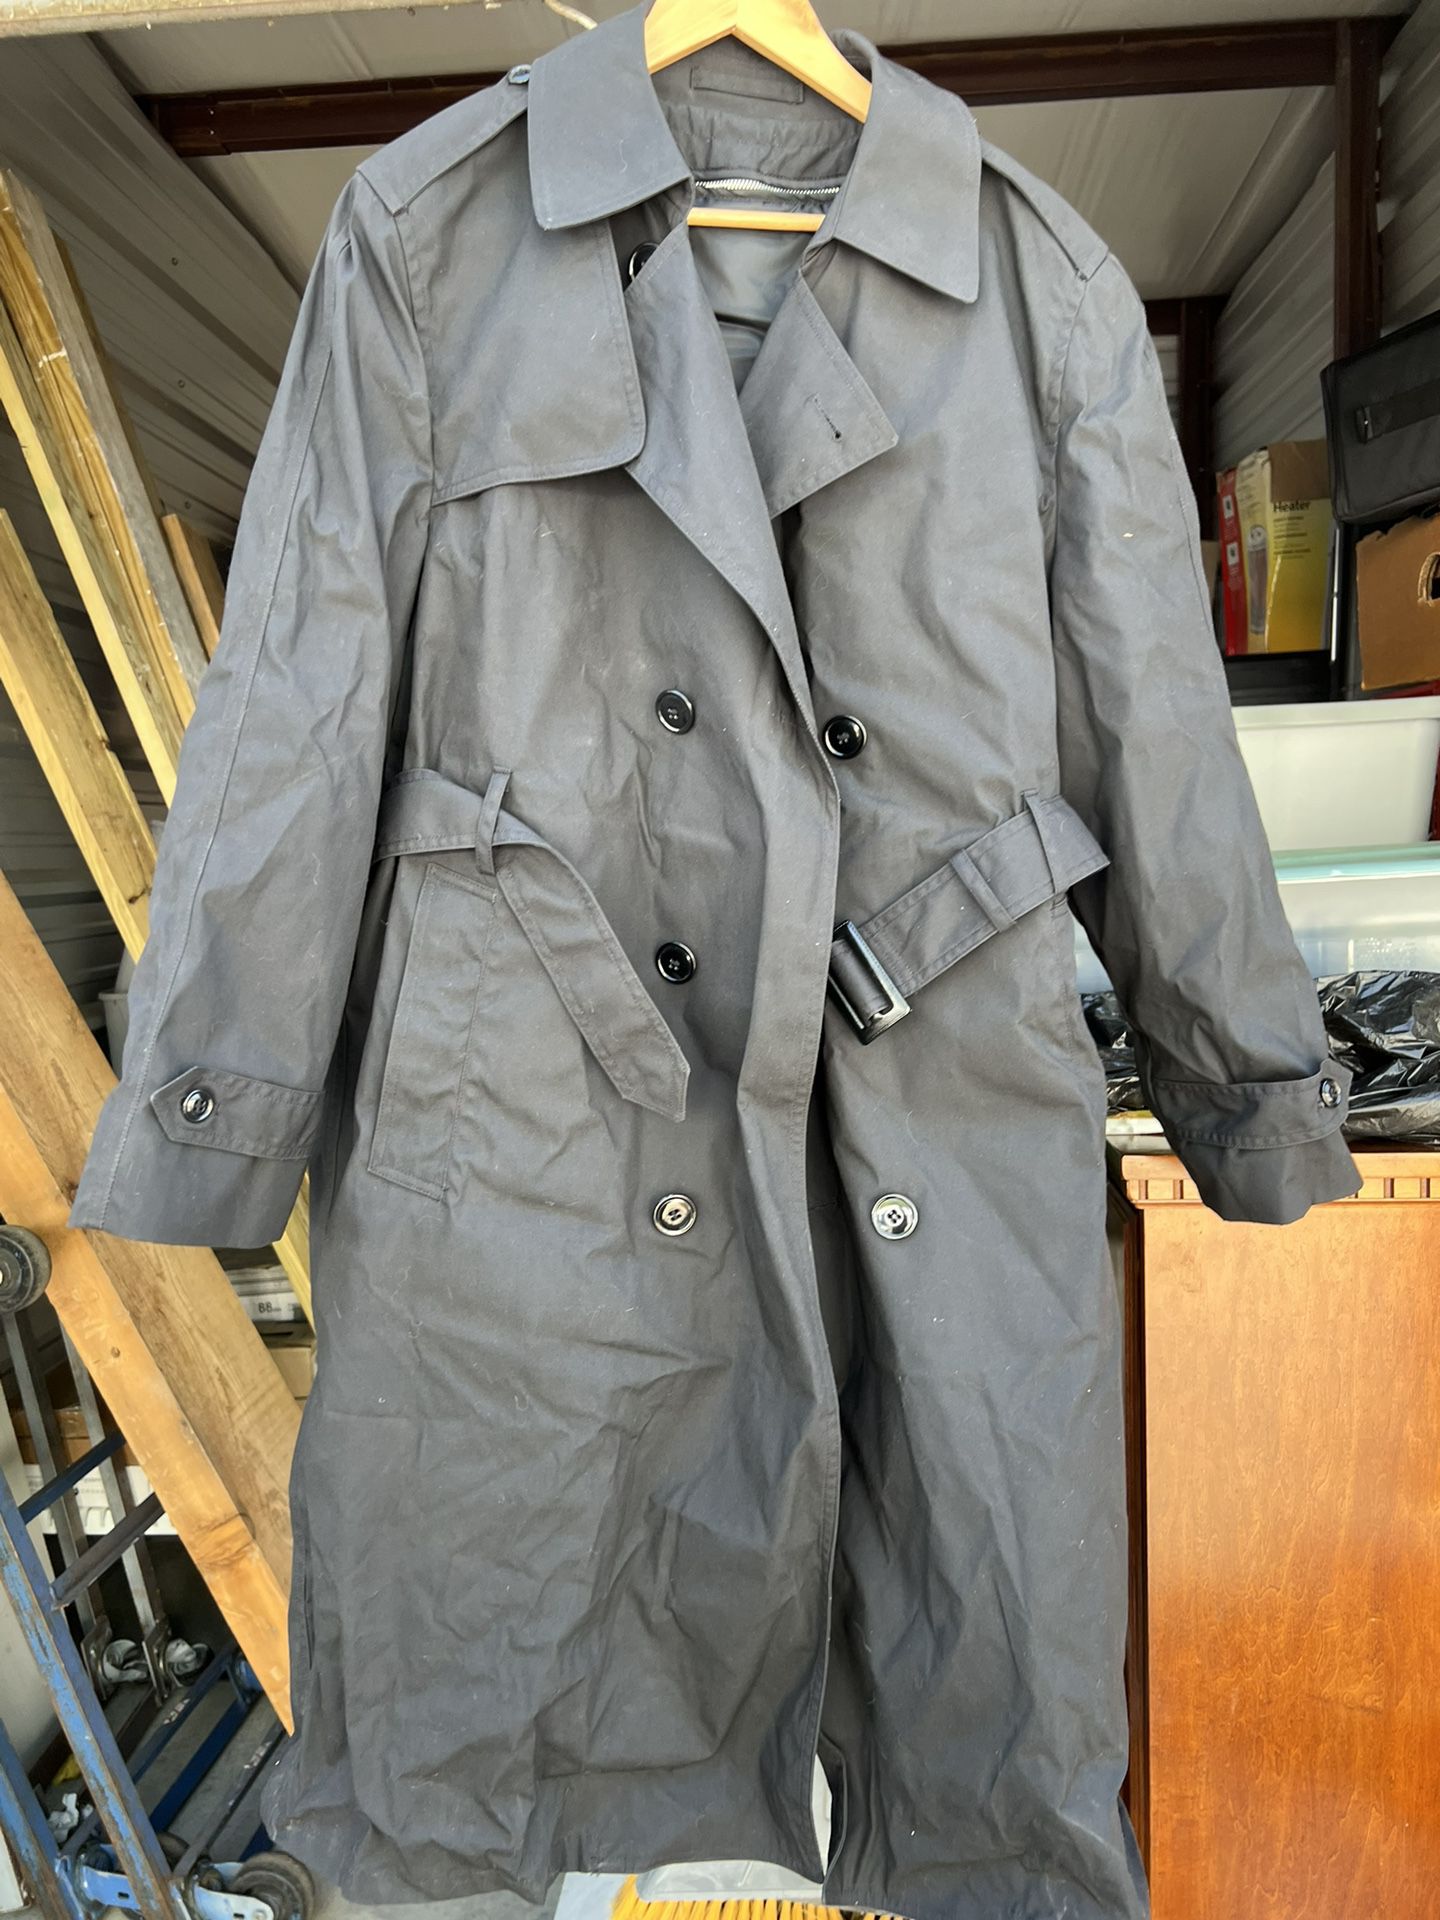 US ARMY MILITARY COAT ALL WEATHER BLACK TRENCH MEN'S 40 R JACKET OVERCOAT 